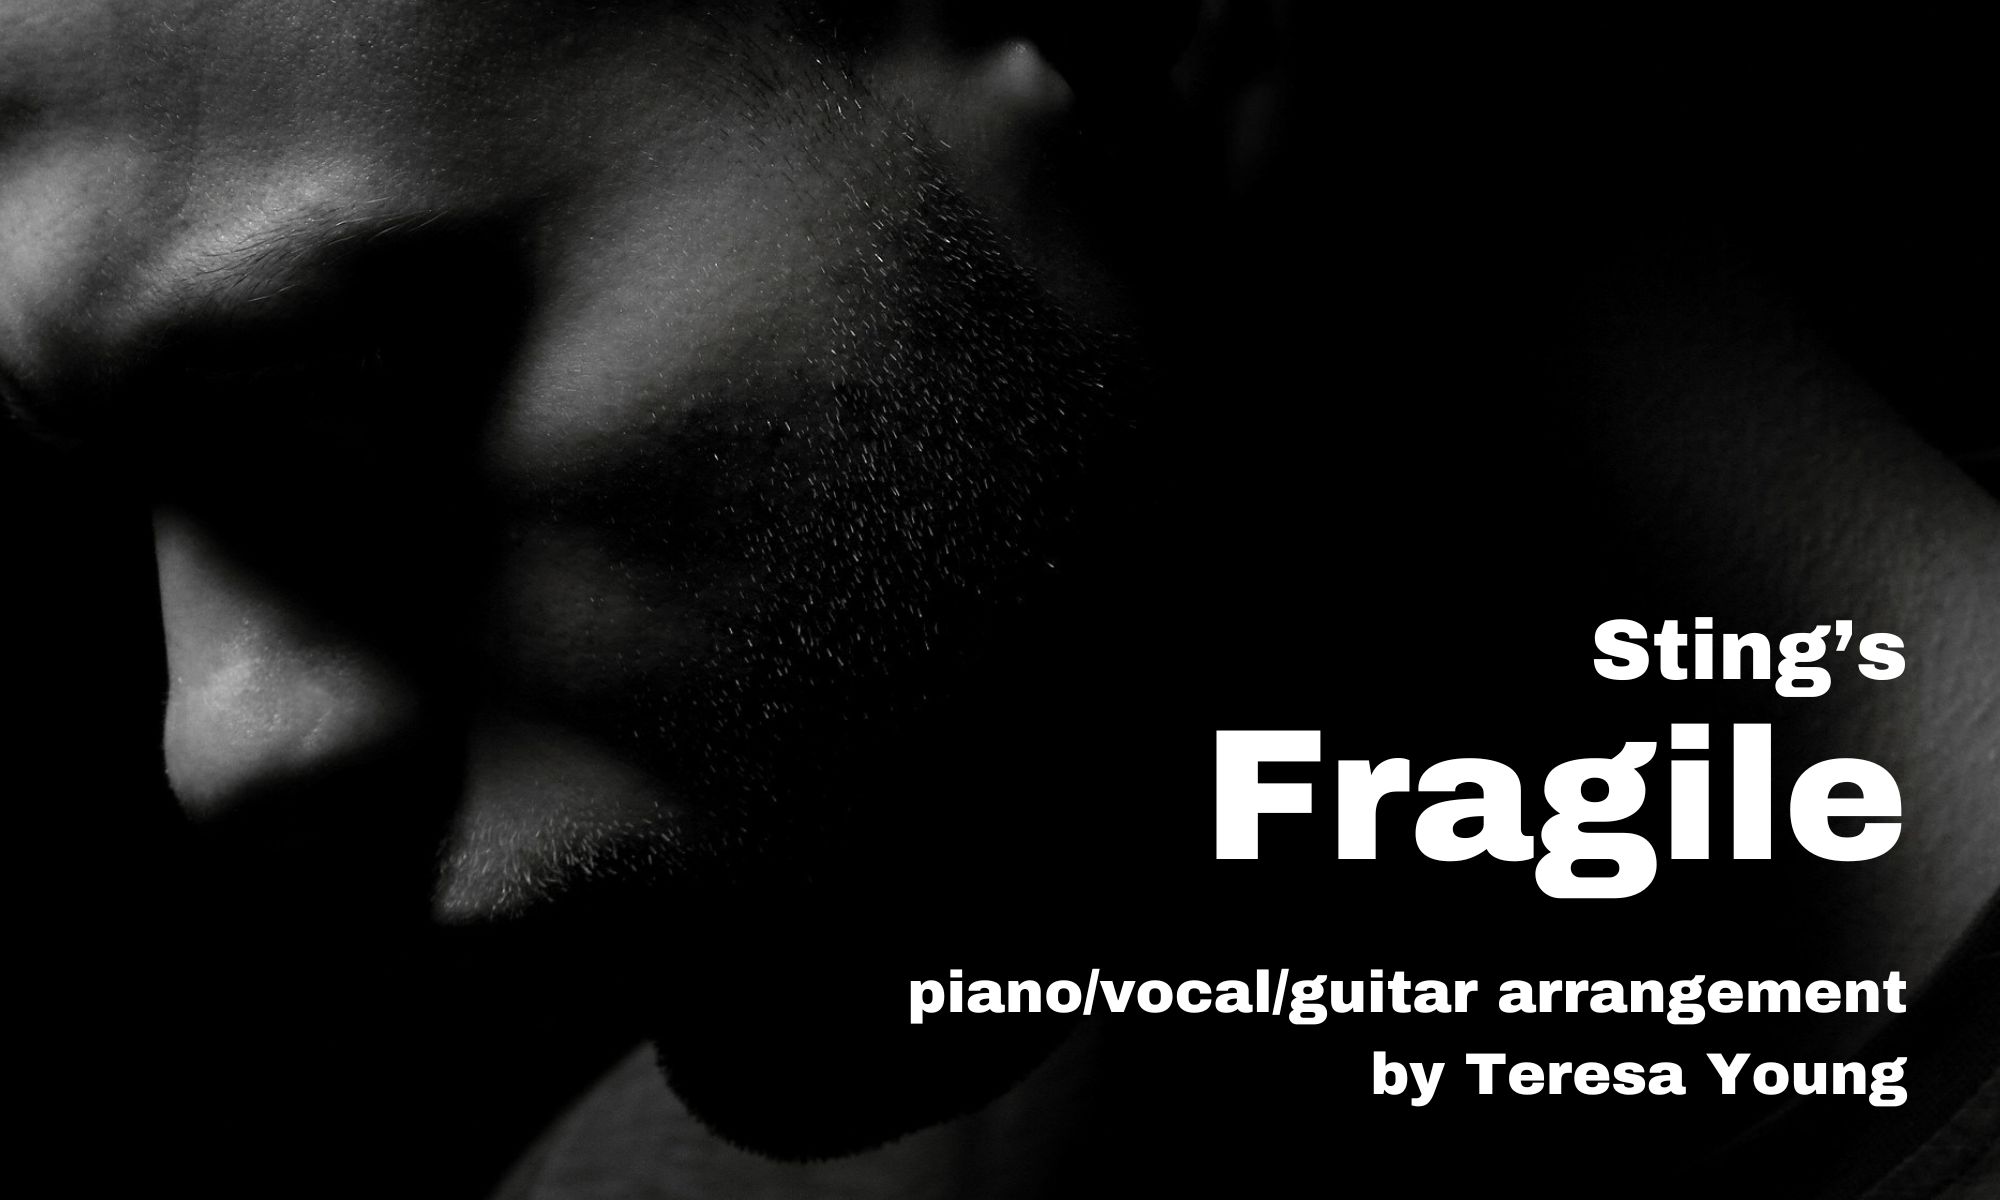 Sting's Fragile arr. by Teresa Young